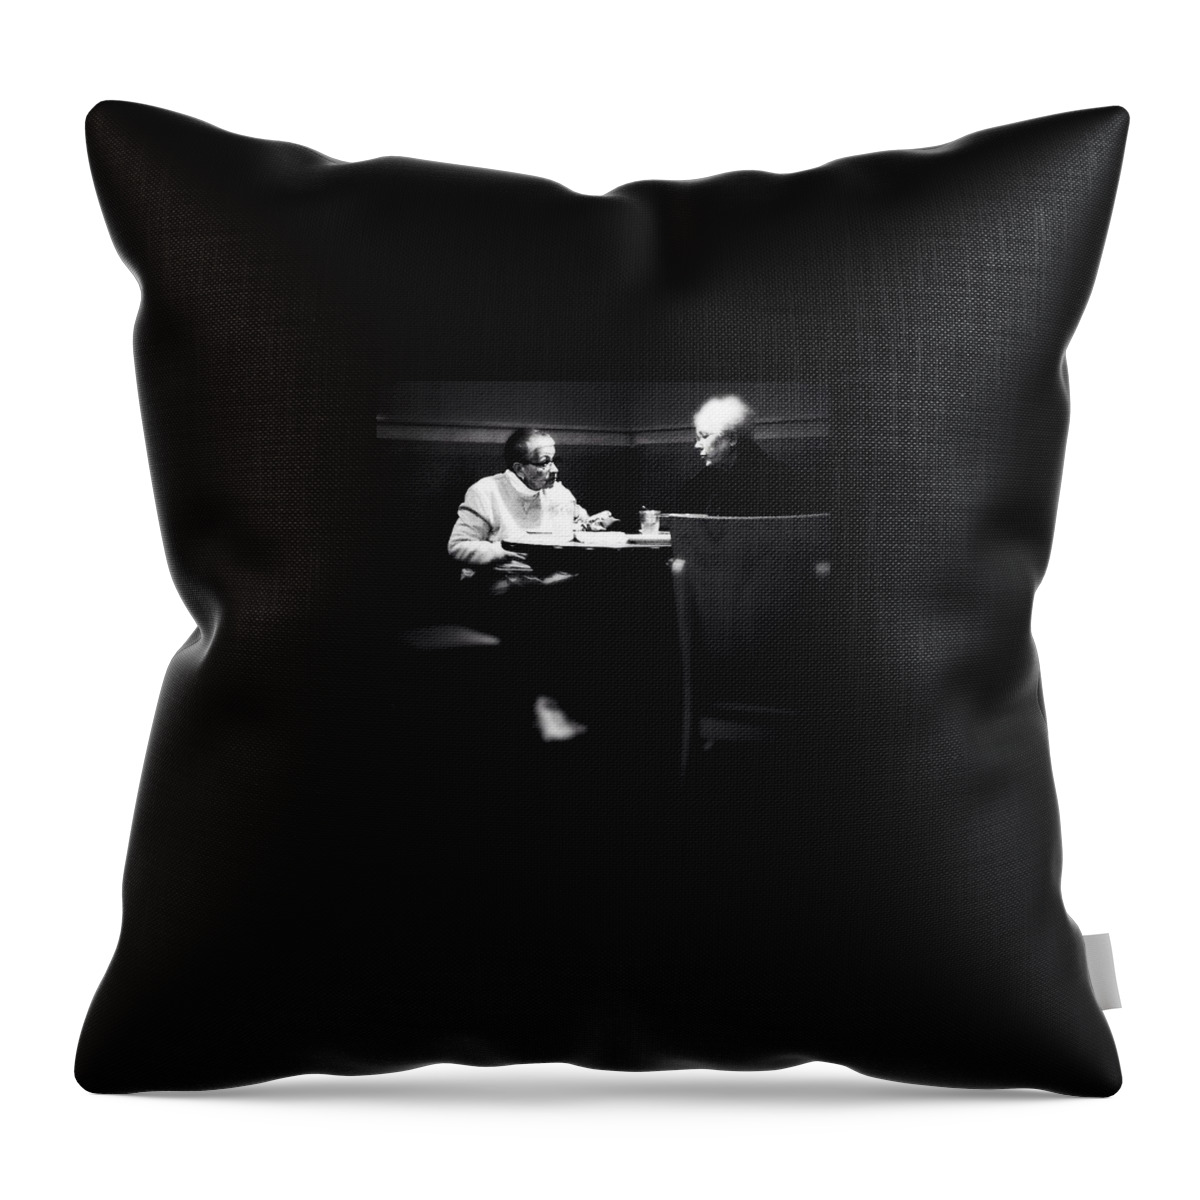 Frankjcasella Throw Pillow featuring the photograph Catching Up by Frank J Casella